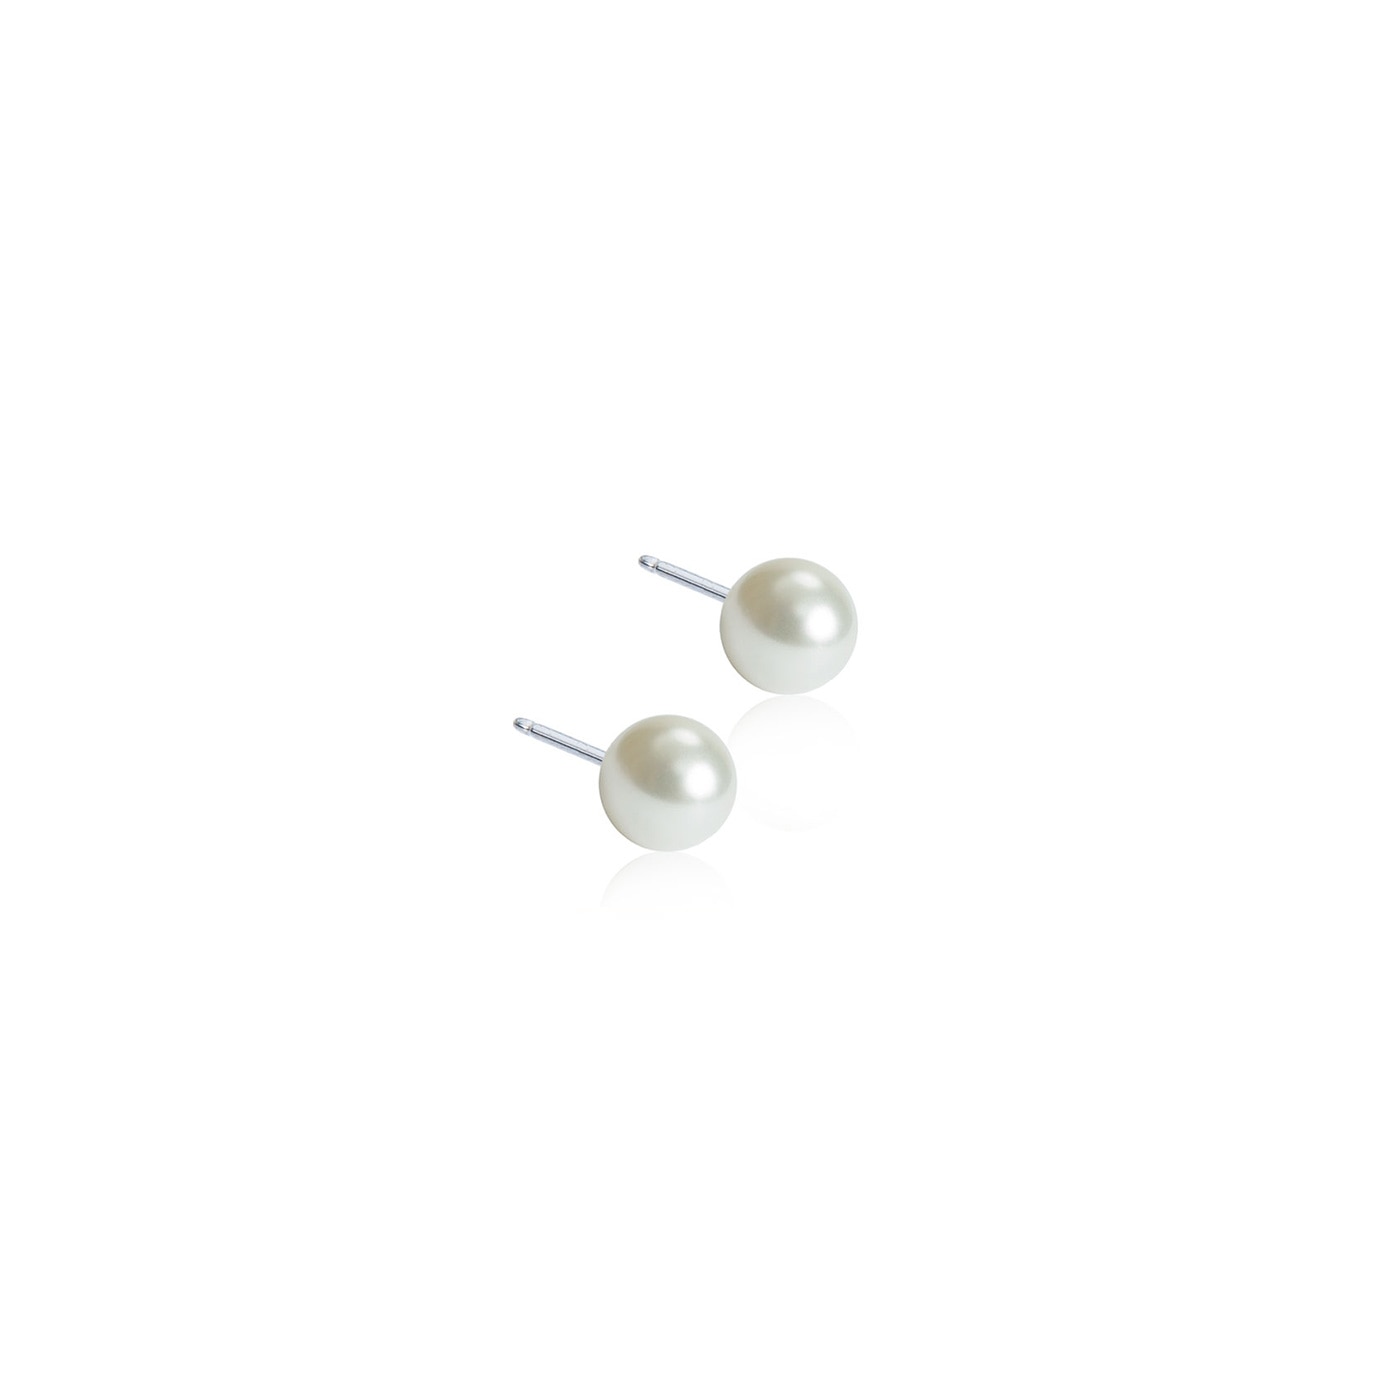 NT Pearl 4 mm, White